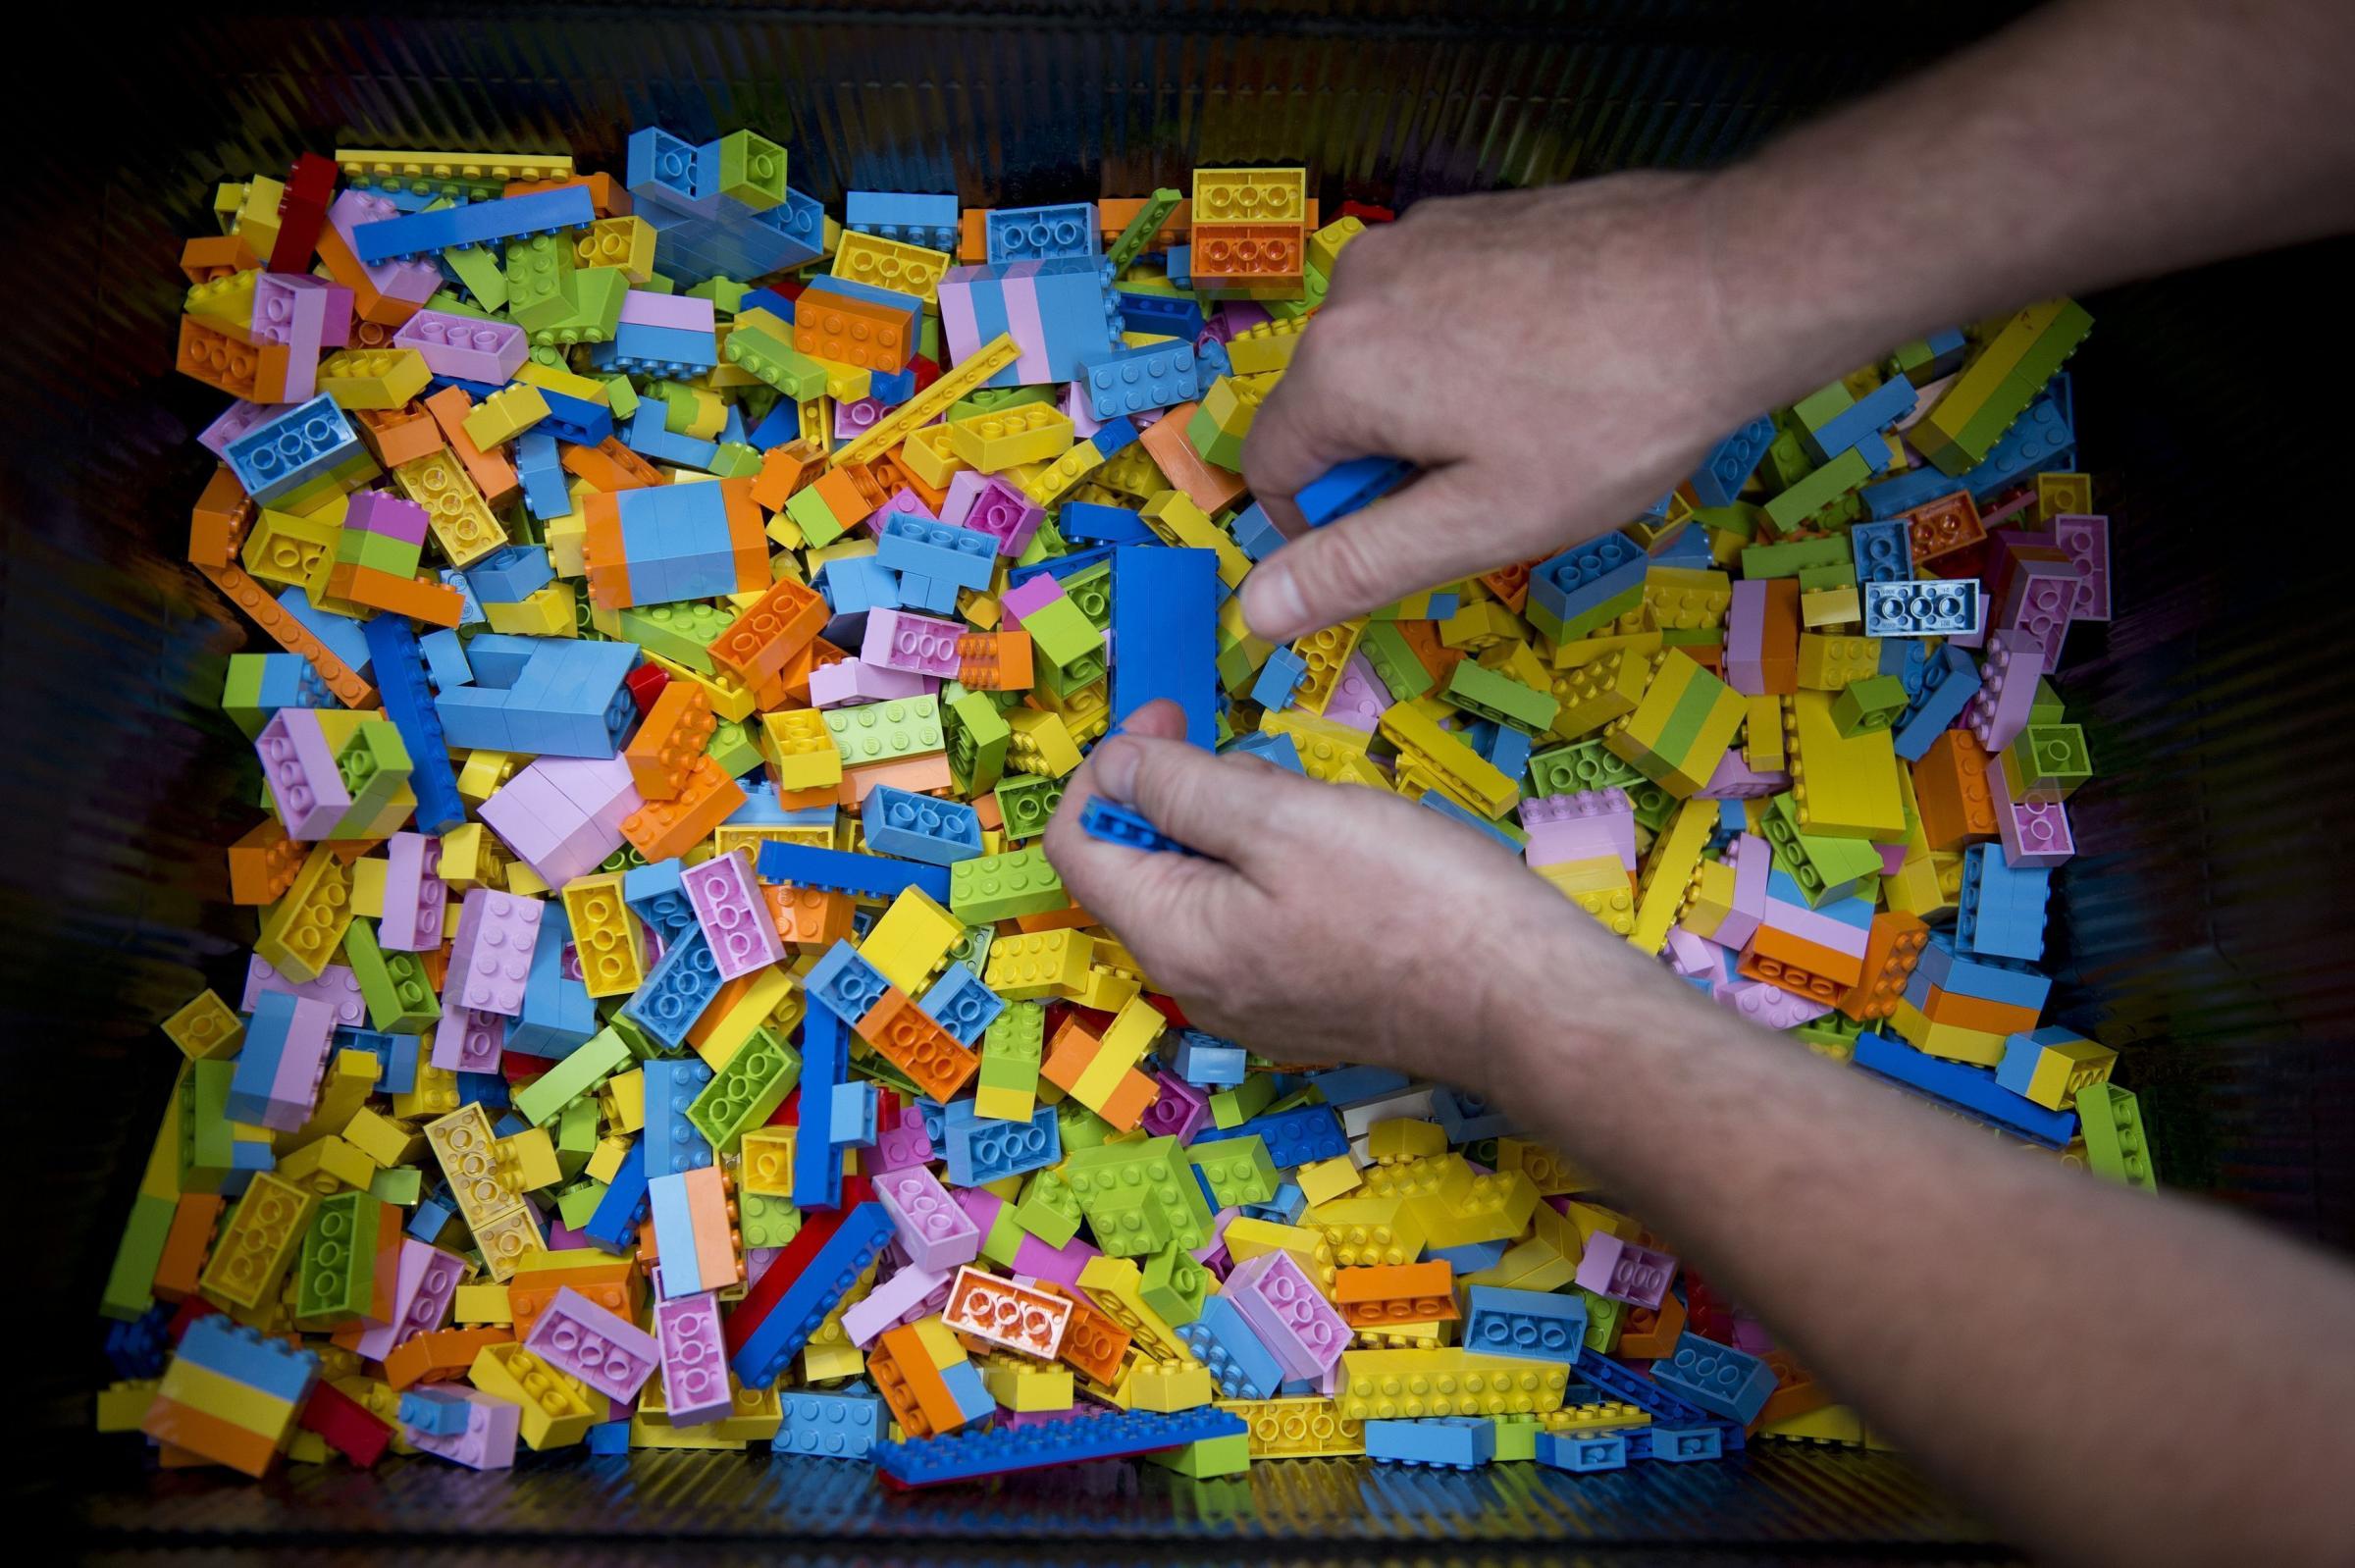 STILL A FAVOURITE: The Entertainer has sold more LEGO than any other toy in its four decades of trading